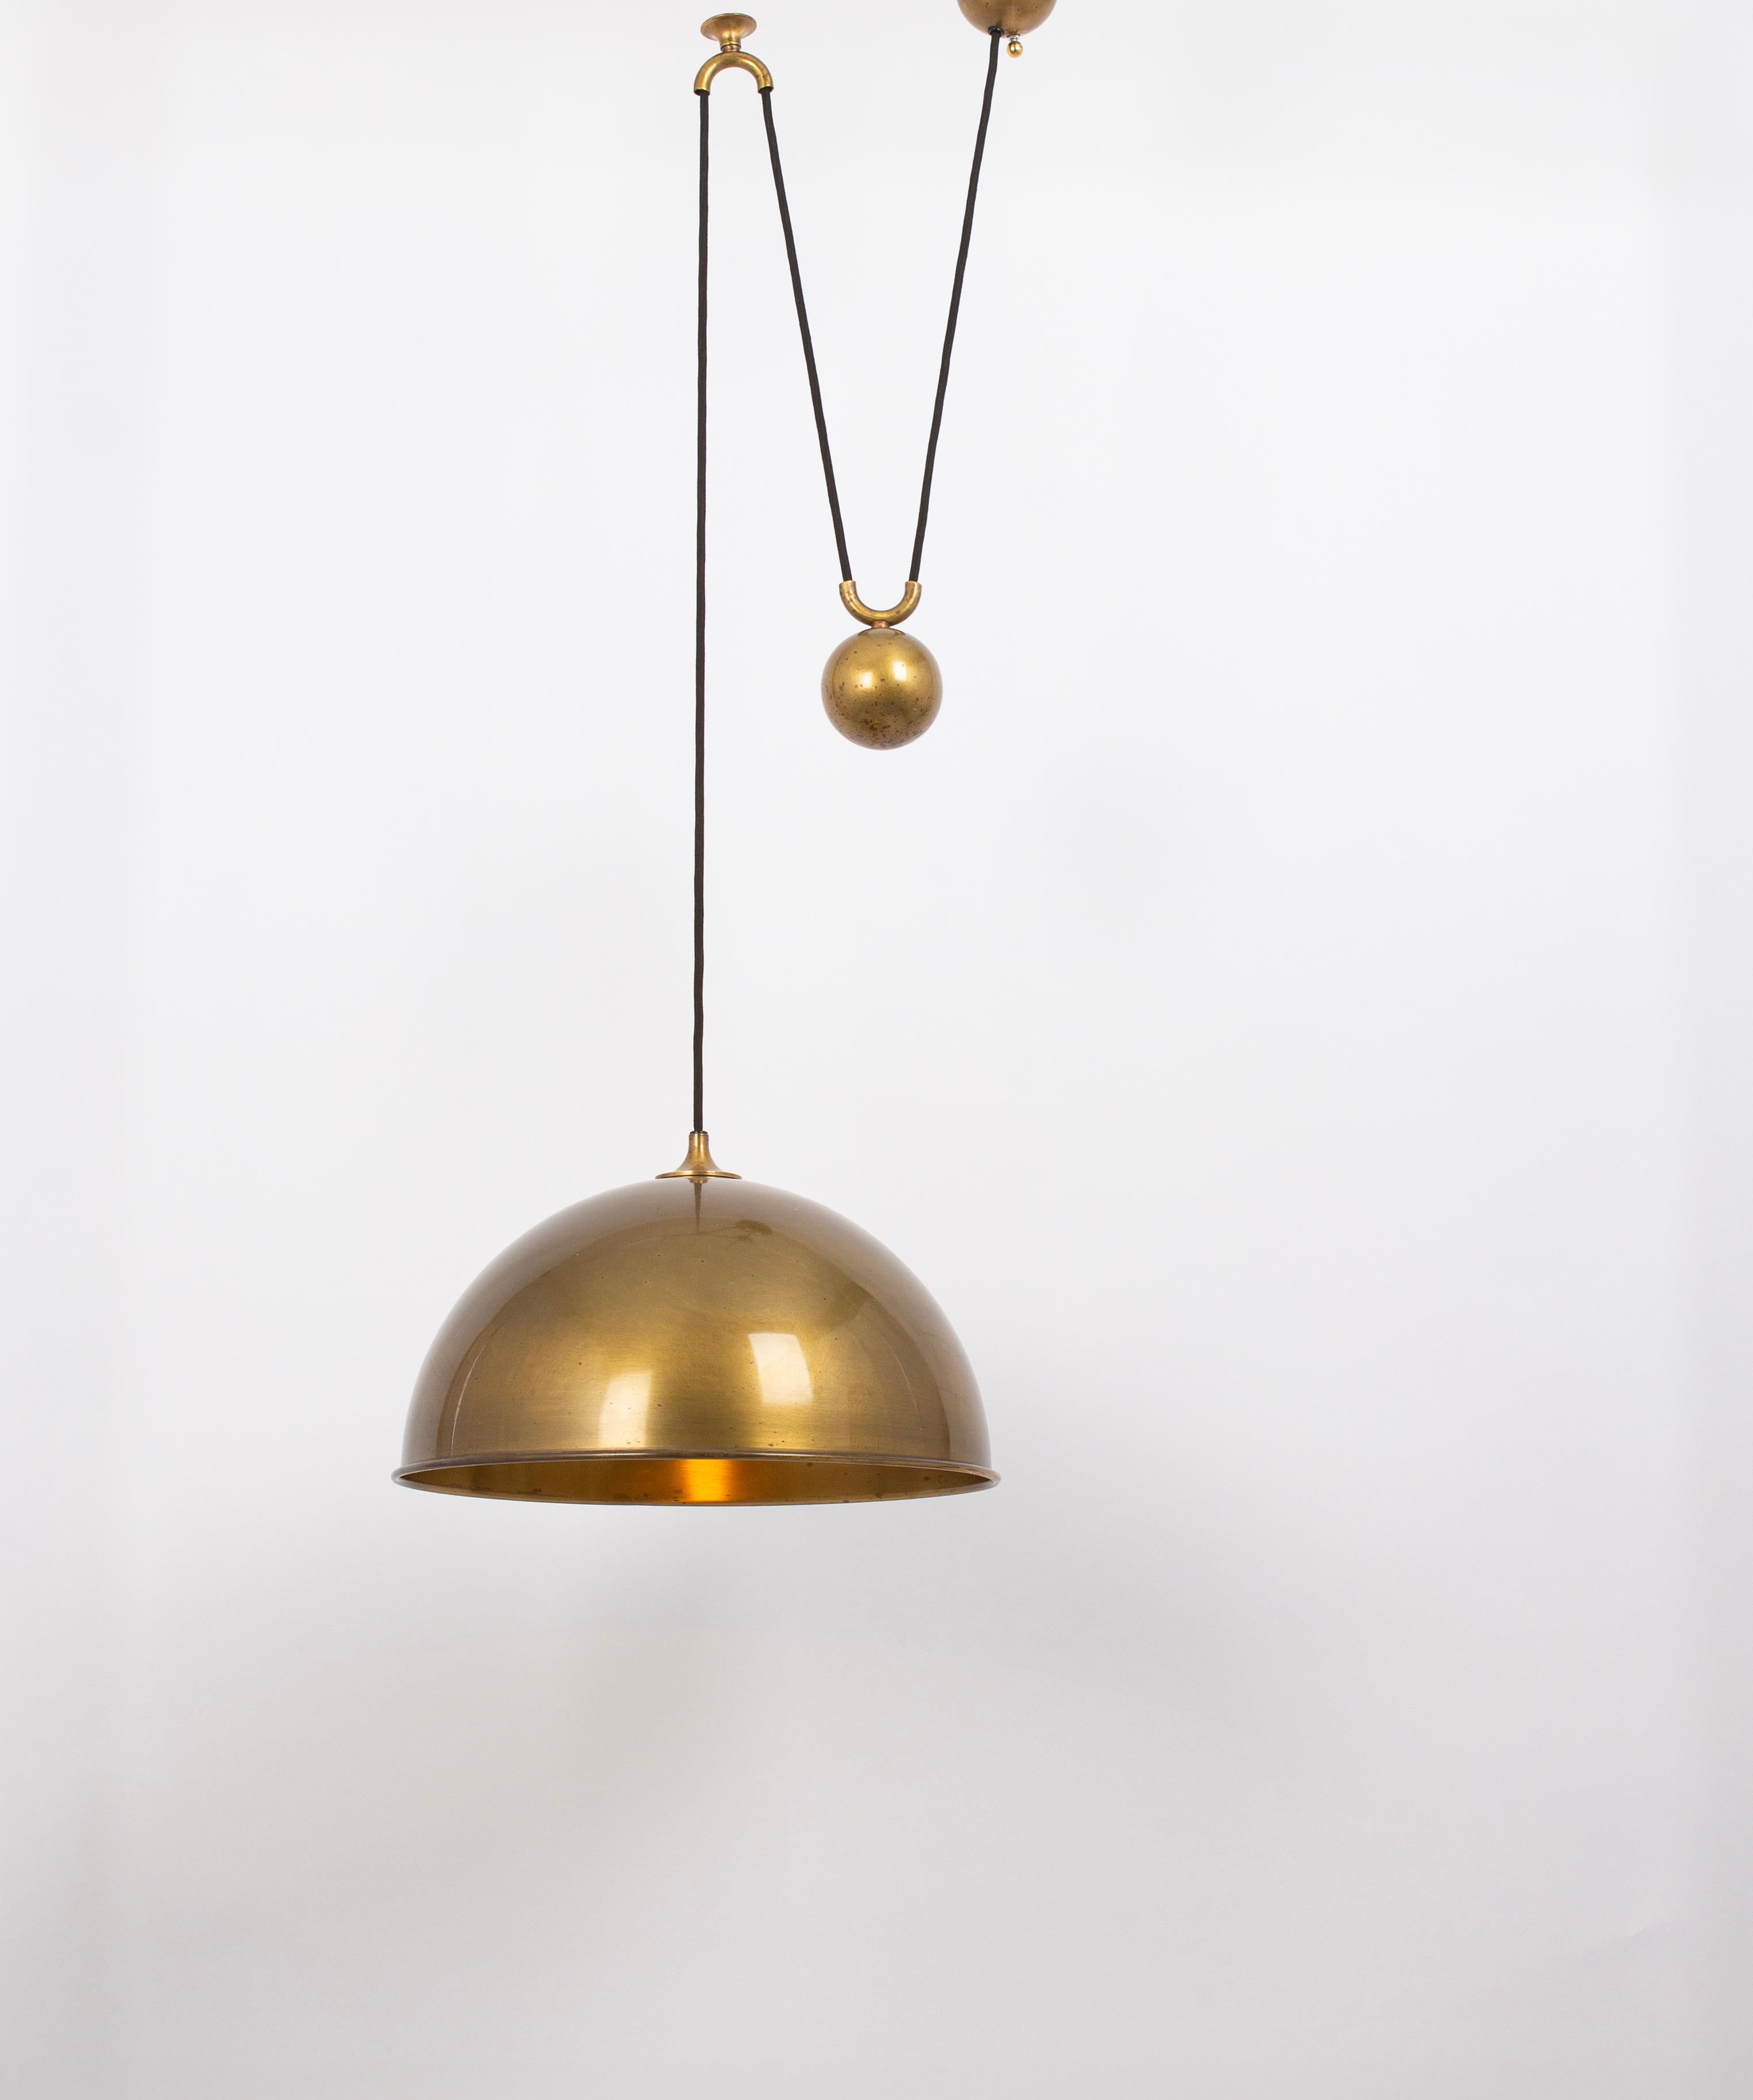 Late 20th Century Adjustable Dark Brass Counterweight Pendant Light by Florian Schulz, Germany